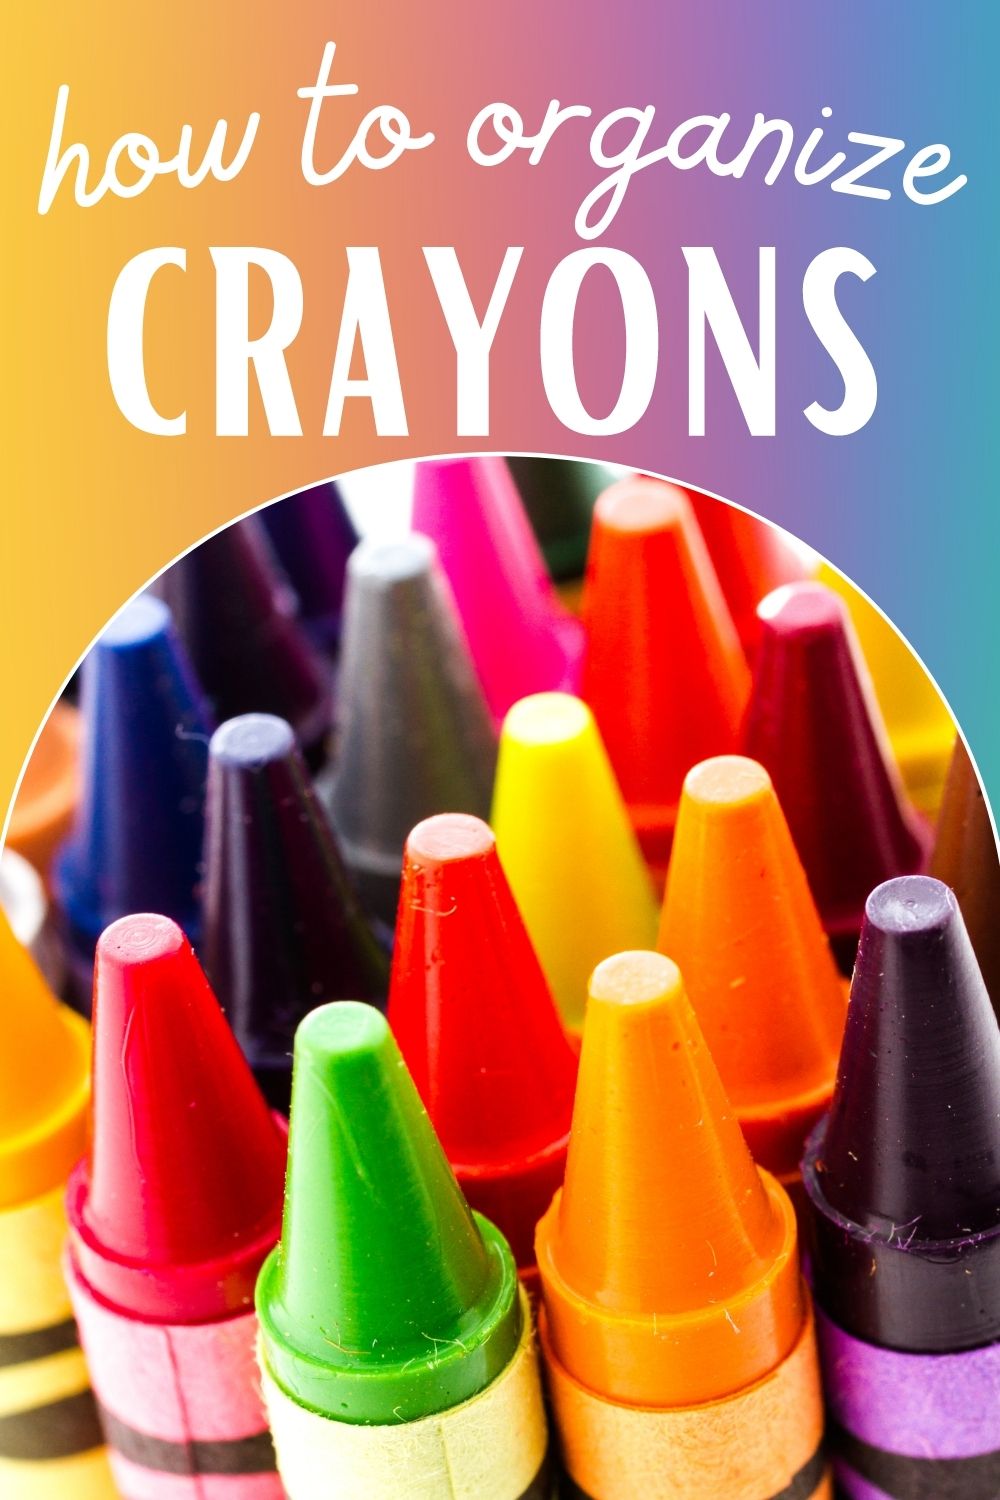 Download 7 Easy Crayon Storage Ideas Celebrating With Kids